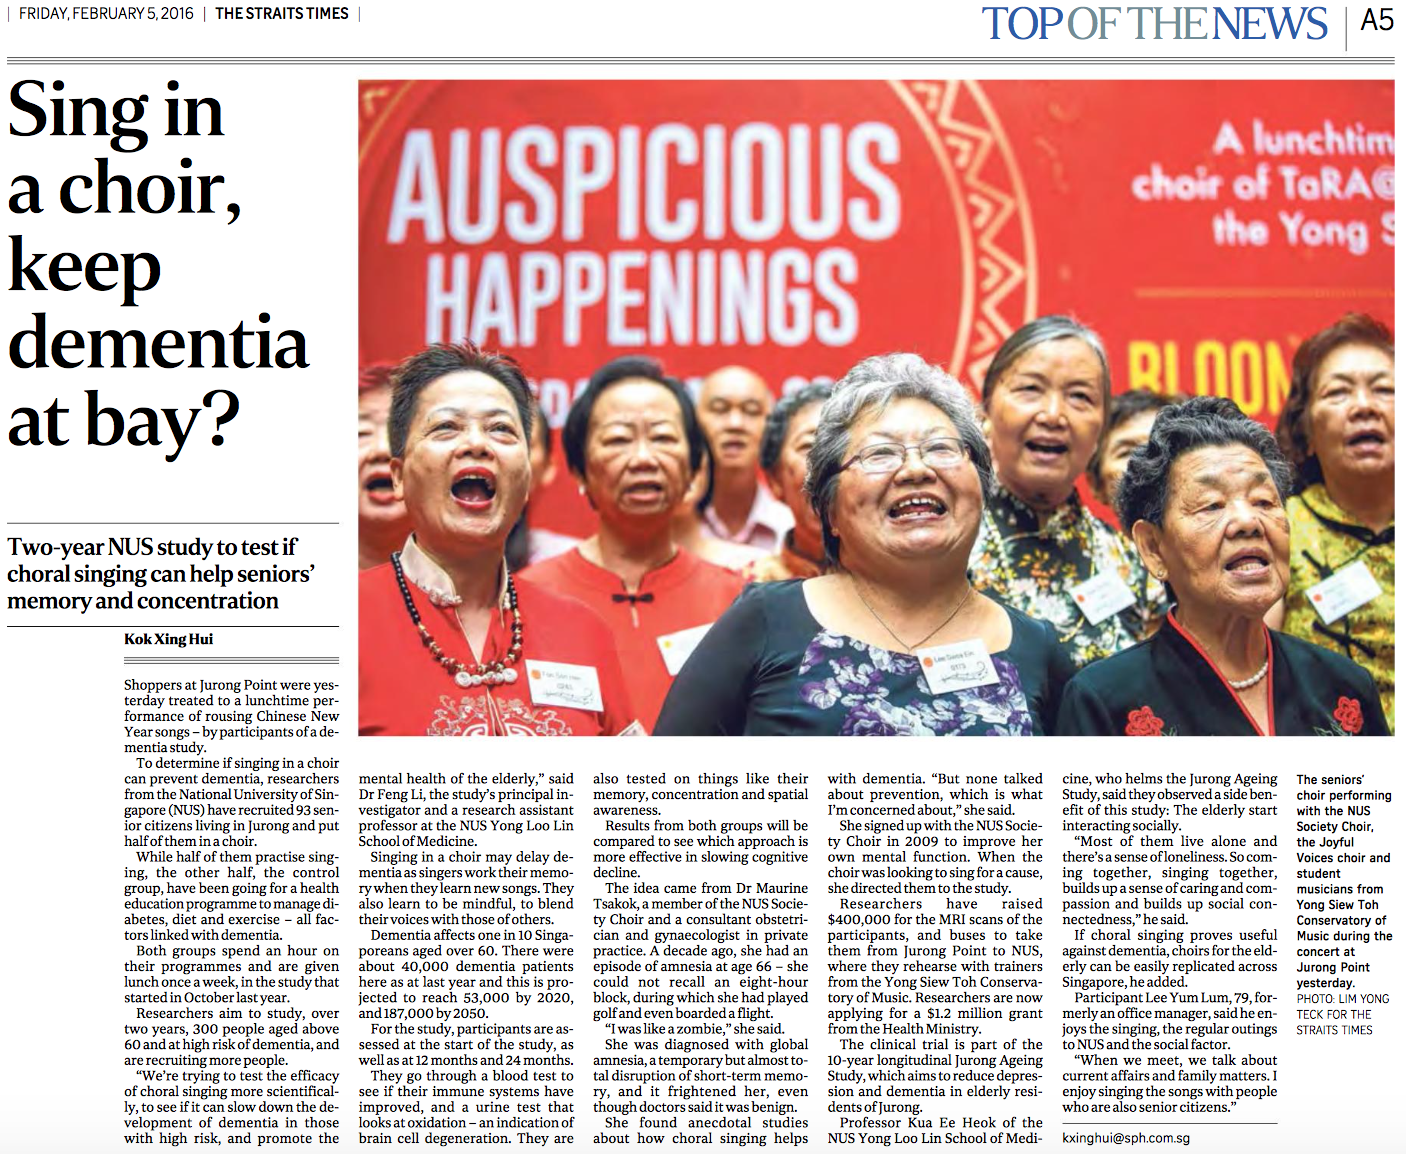  Choral singing and dementia research feature for The Straits Times (www.straitstimes.com) 